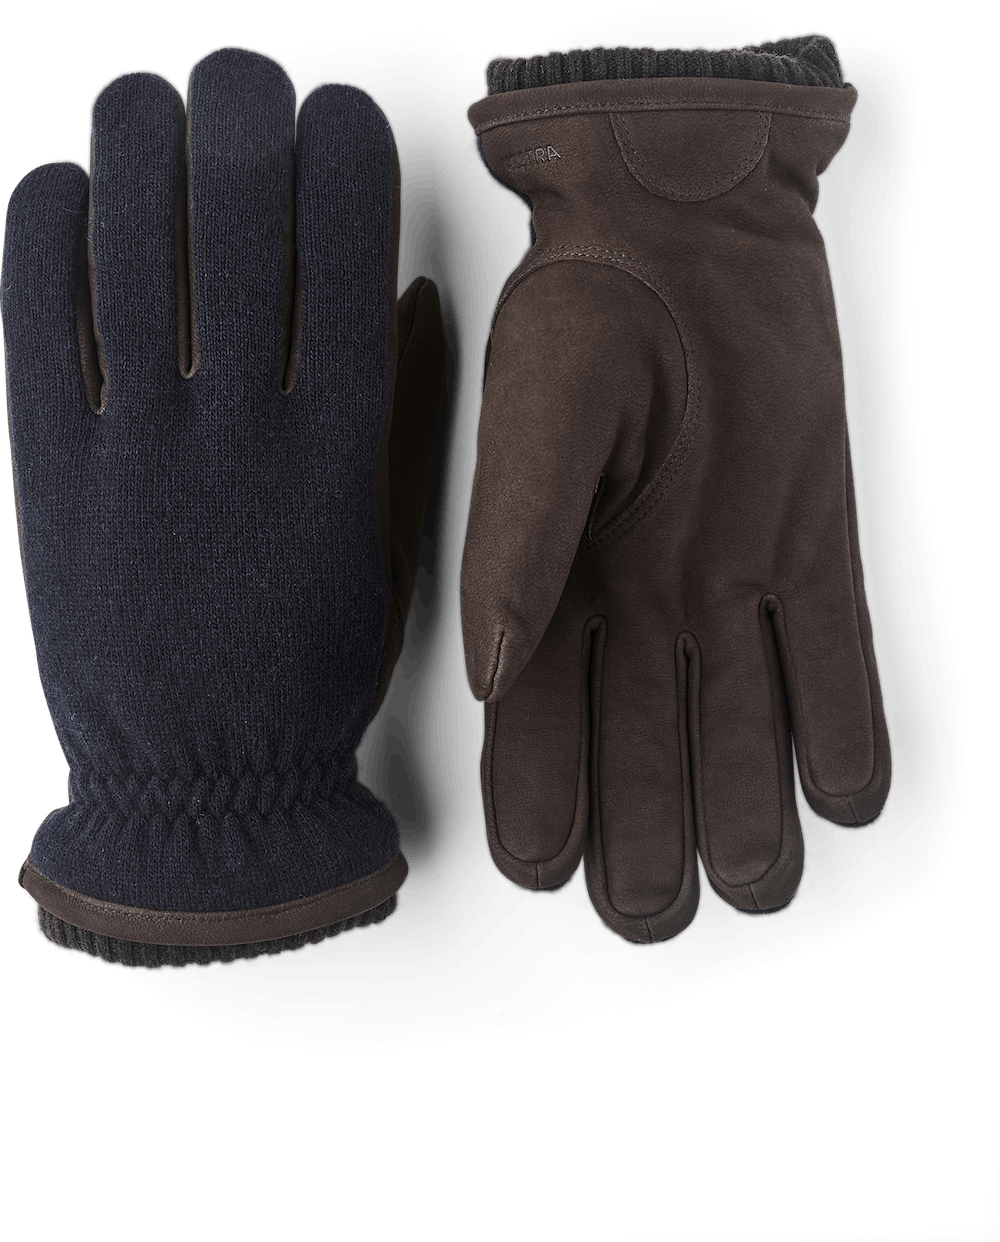 Hestra Mens Noah Leather/Wool Gloves in Navy/Espresso